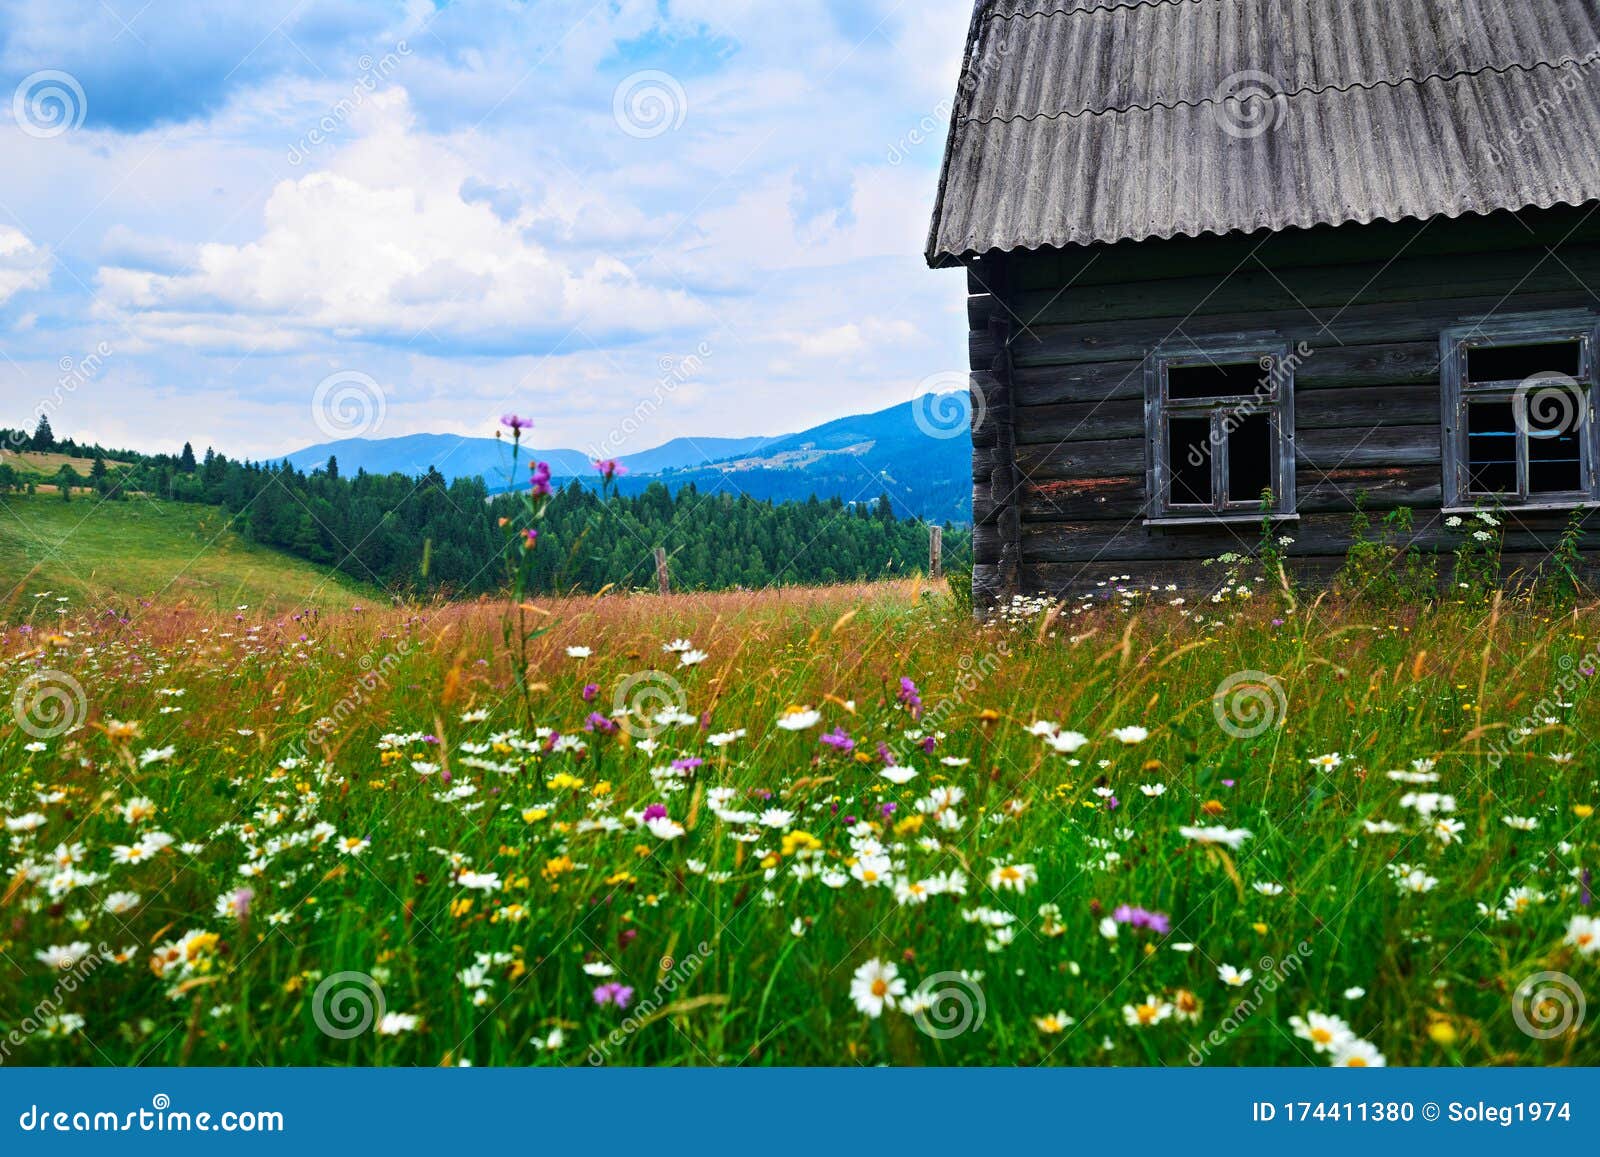 Abandoned Wooden Home in Countryside, Nature, Summer Landscape in ...